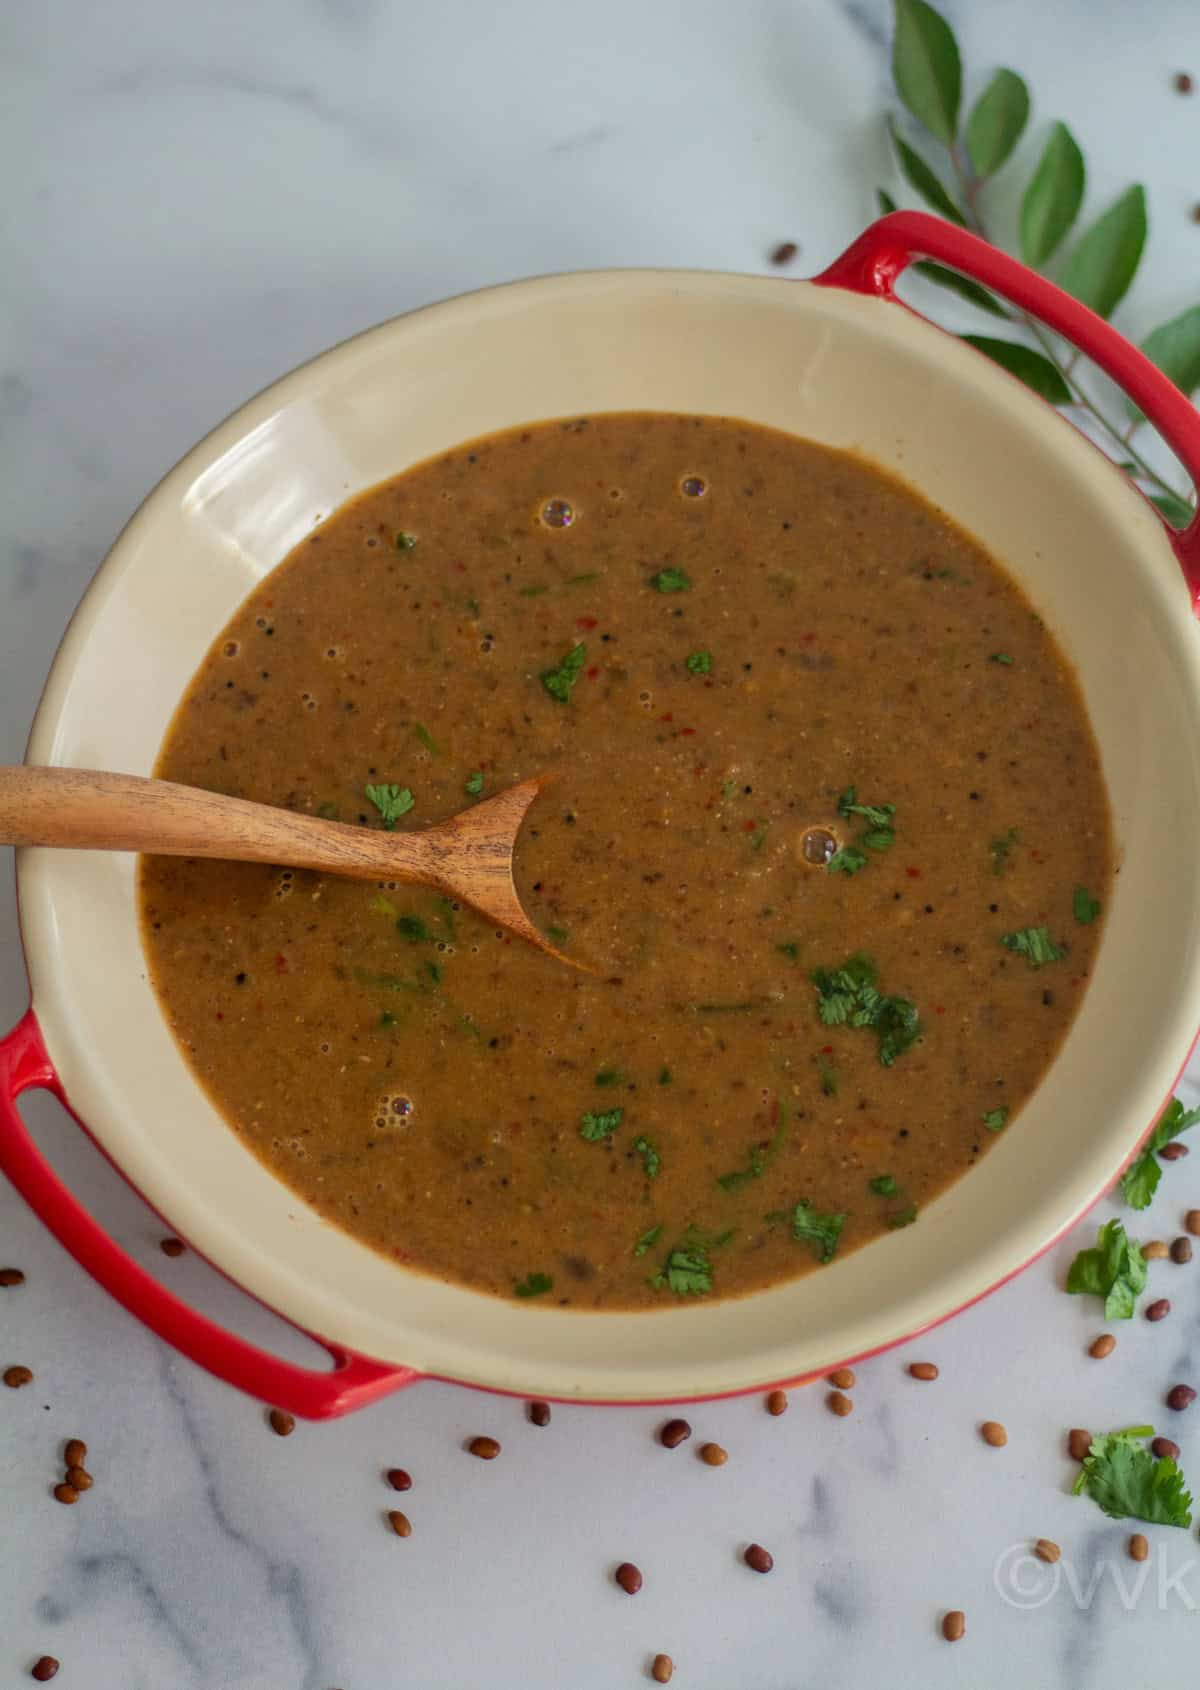 horsegram lentil curry served in ceramic ware with wooden spoon inside